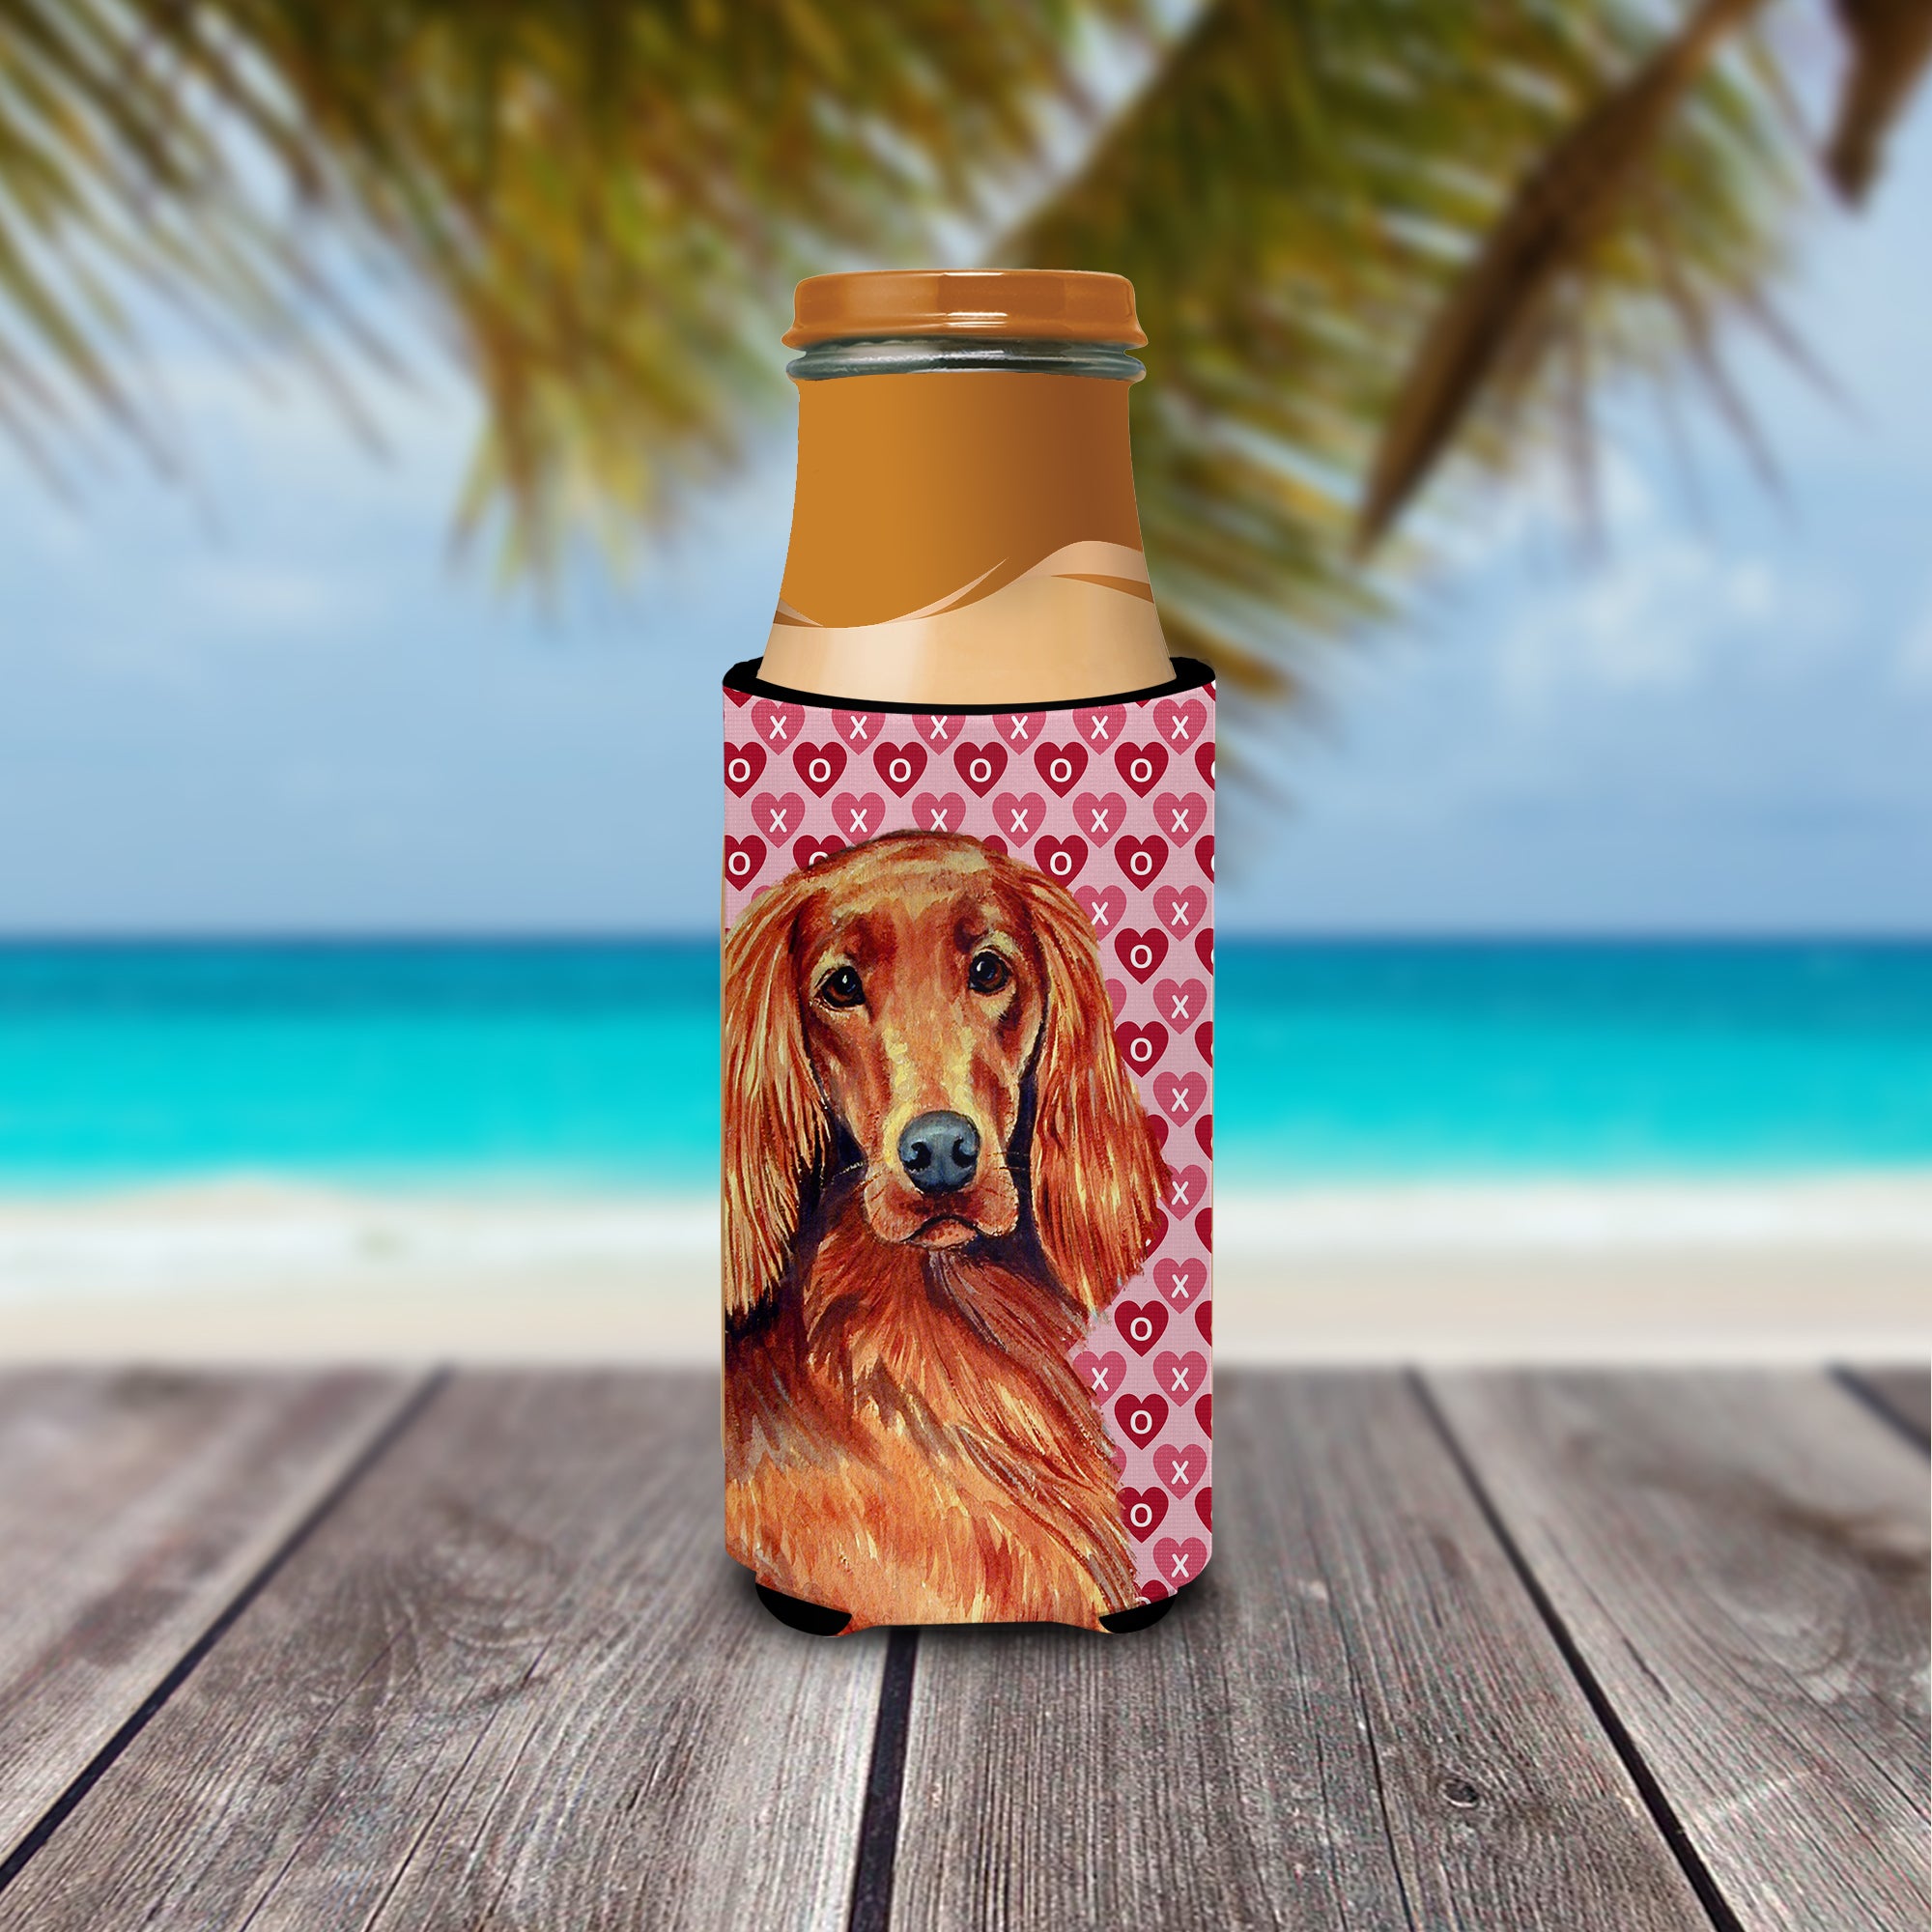 Irish Setter Hearts Love and Valentine's Day Portrait Ultra Beverage Insulators for slim cans LH9164MUK